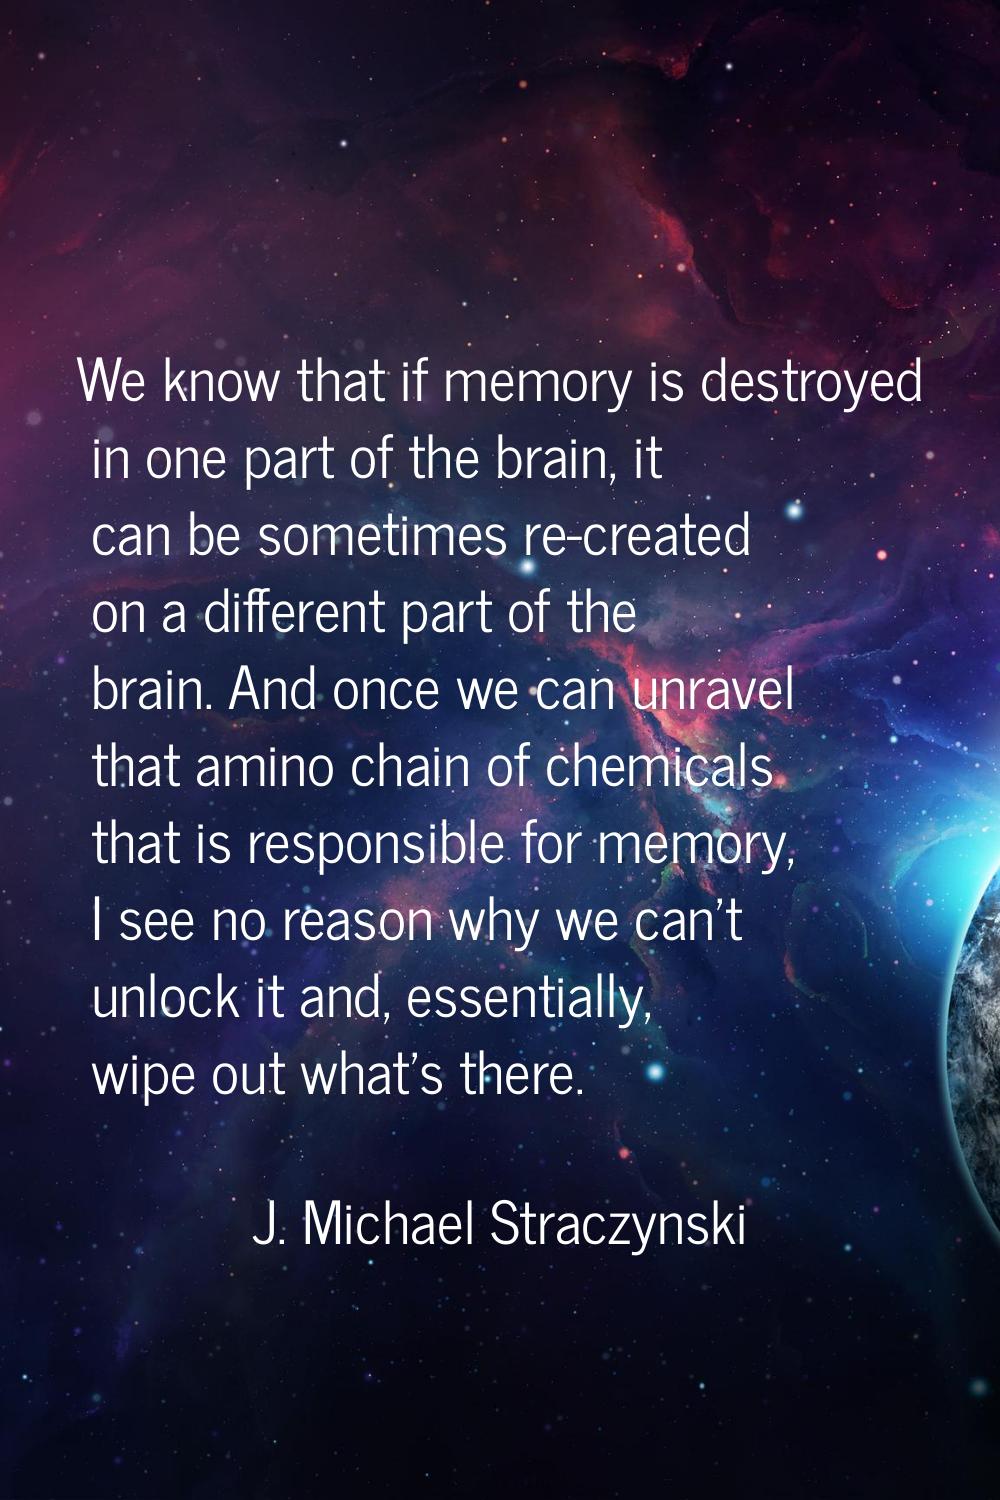 We know that if memory is destroyed in one part of the brain, it can be sometimes re-created on a d